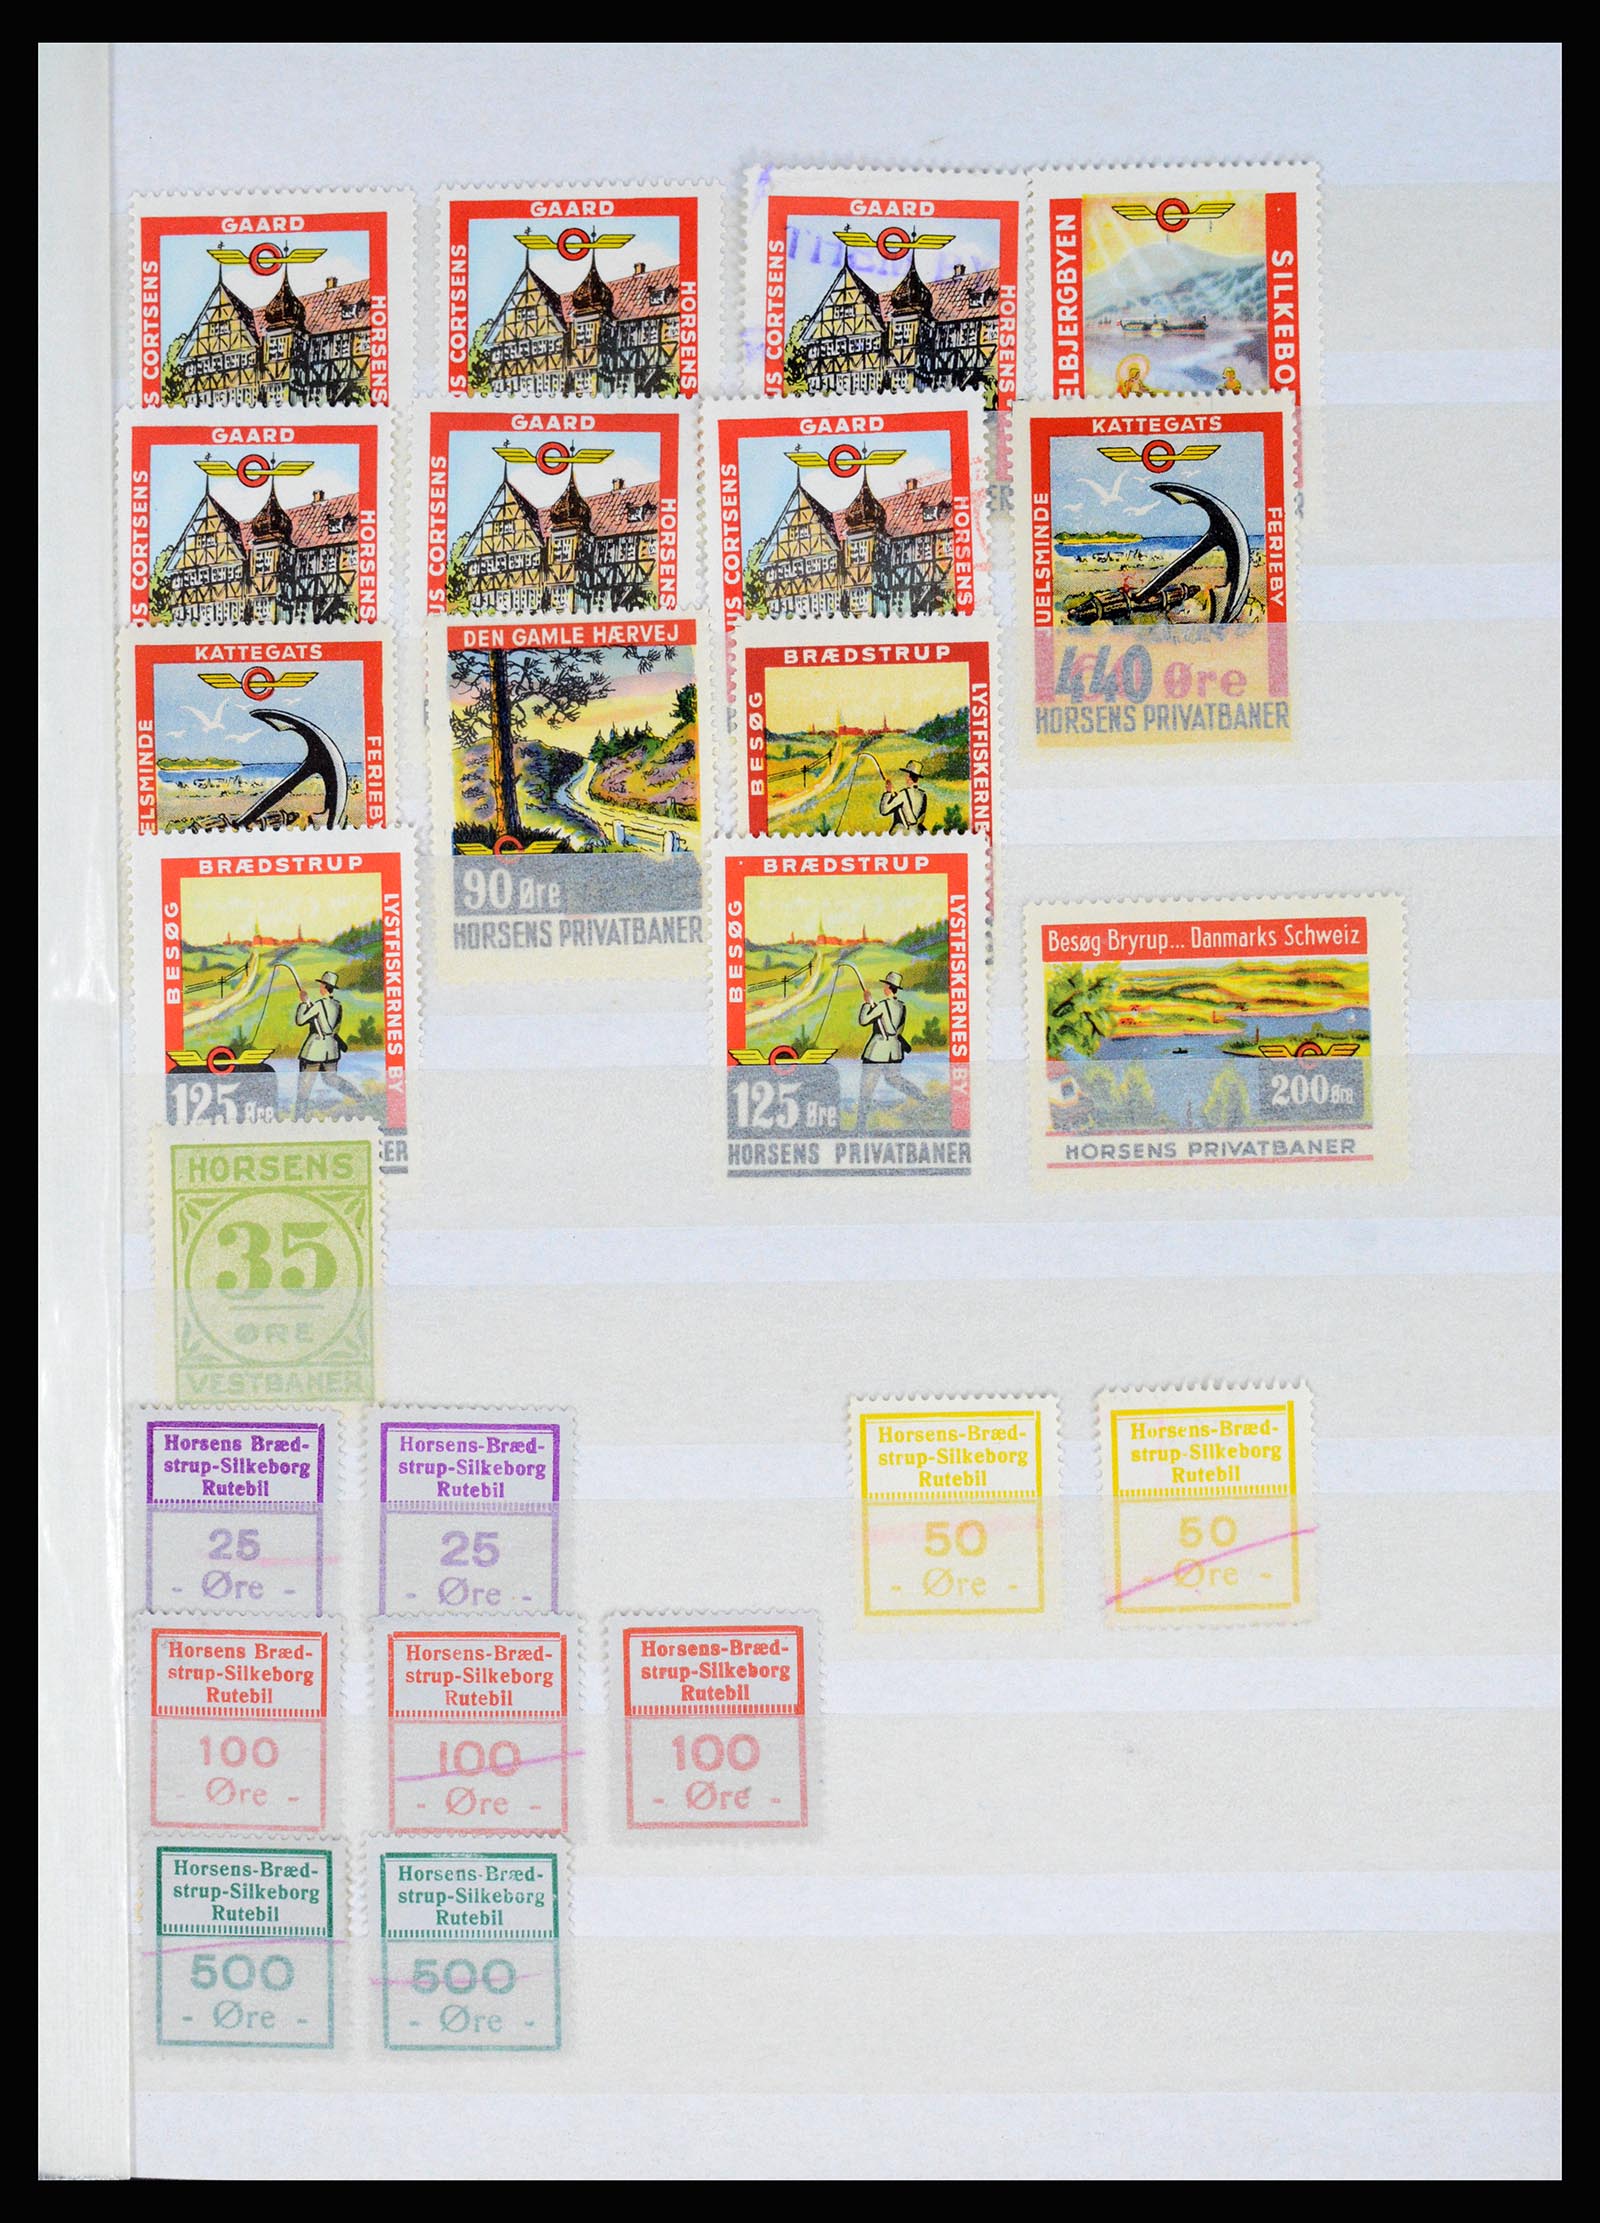 36982 029 - Stamp collection 36982 Denmark railroad stamps.